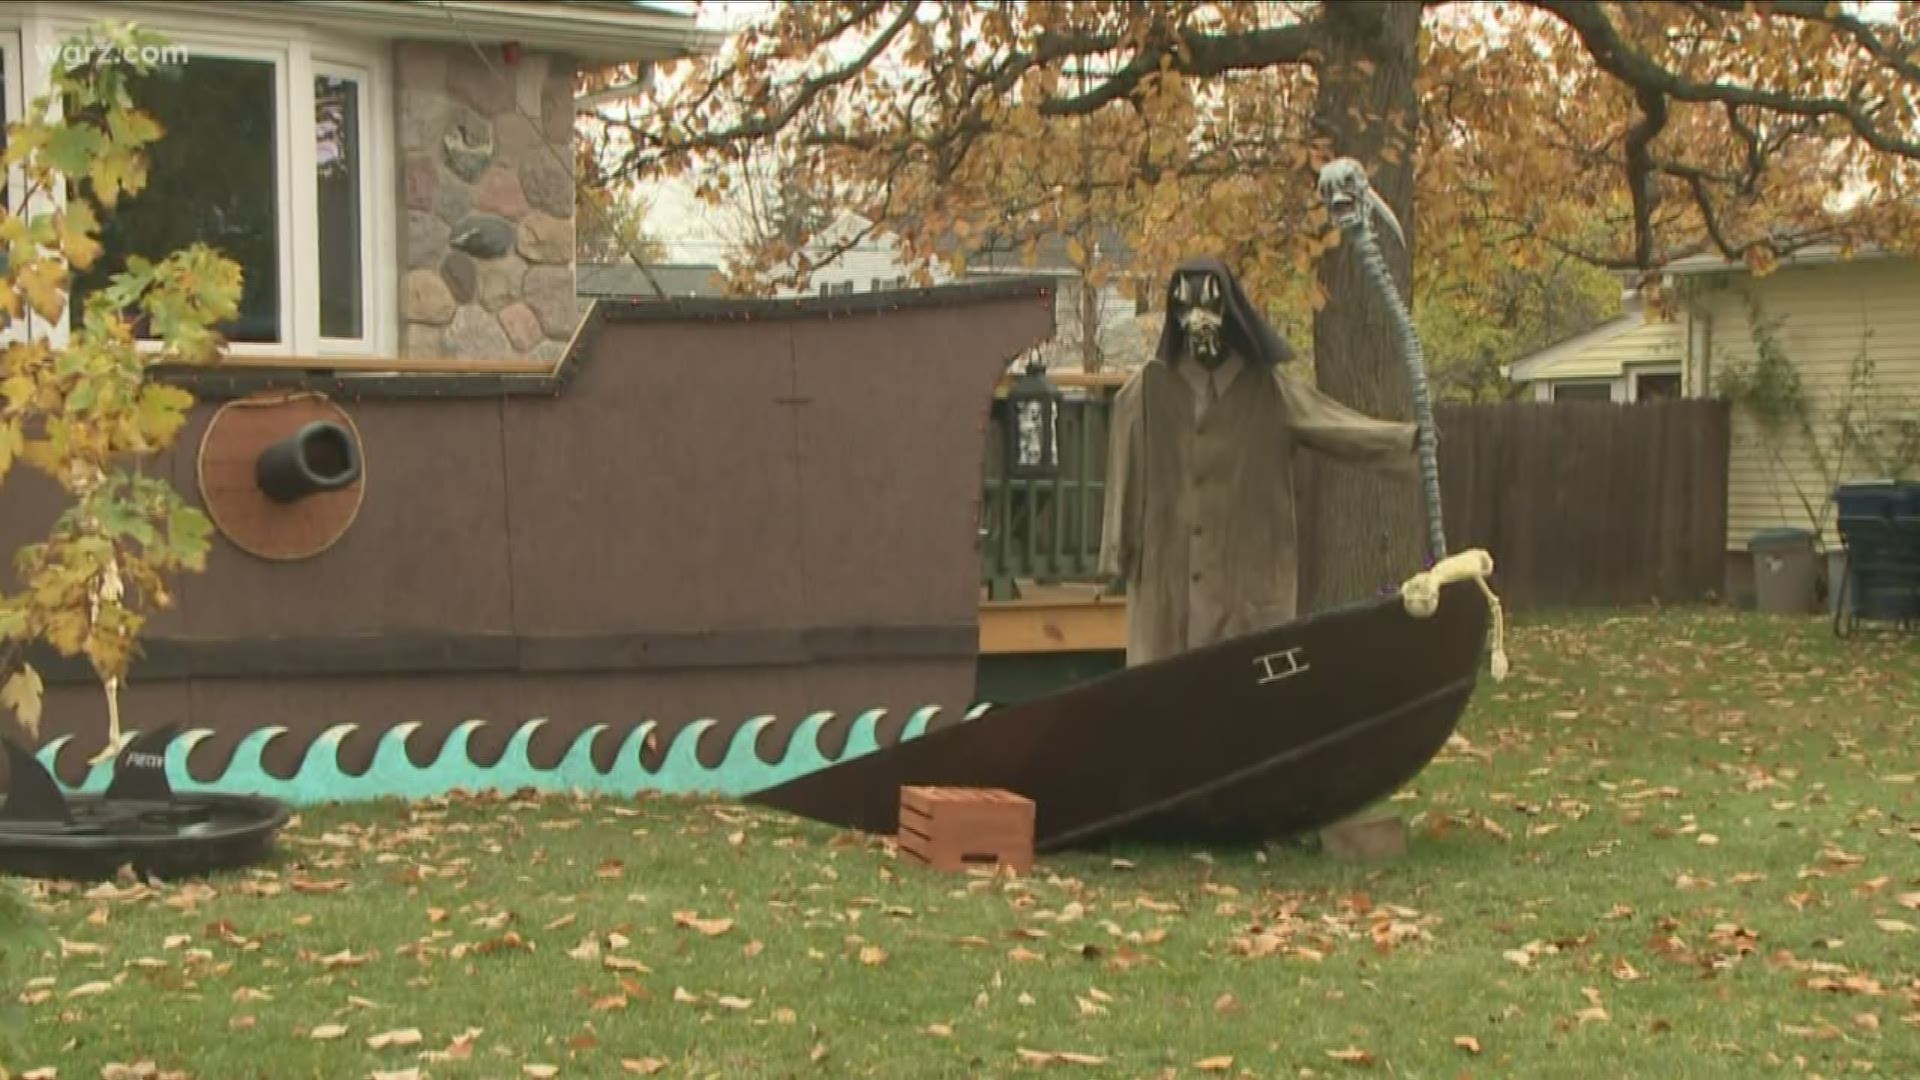 Homeowner Jerry Jarvis says he's has a lot of fun building the elaborate Halloween display in his yard